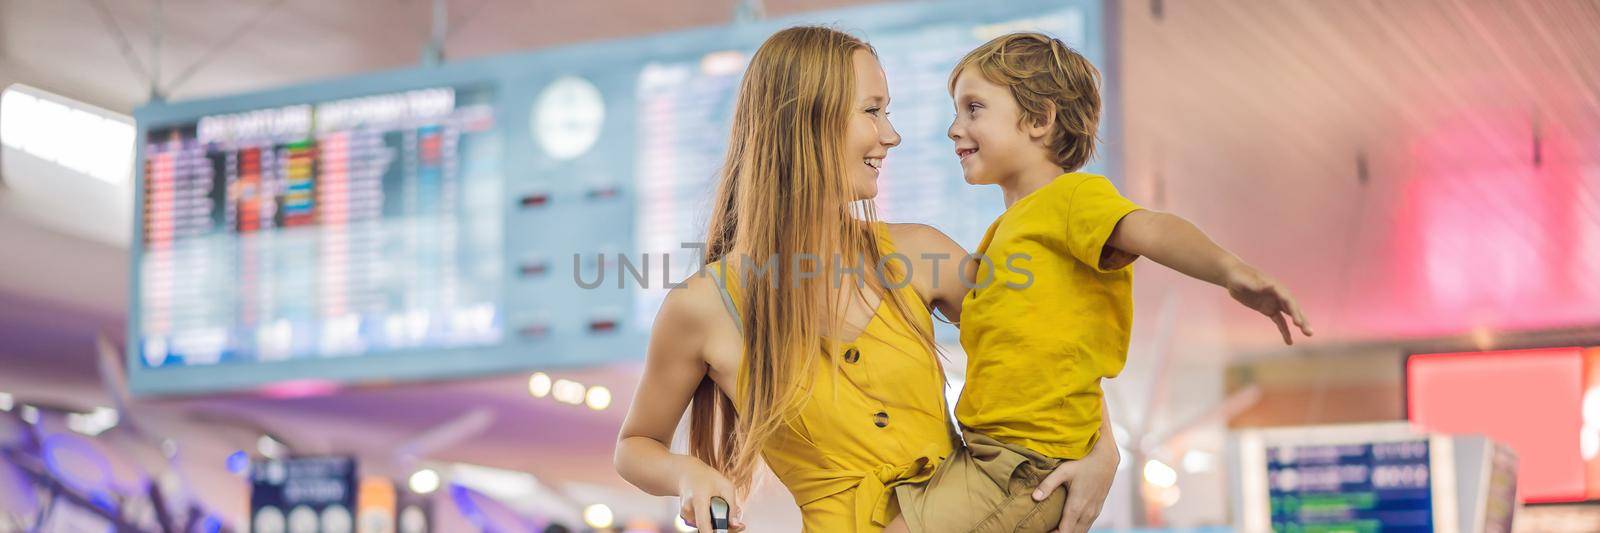 Family at airport before flight. Mother and son waiting to board at departure gate of modern international terminal. Traveling and flying with children. Mom with kid boarding airplane. yellow family look BANNER, LONG FORMAT by galitskaya